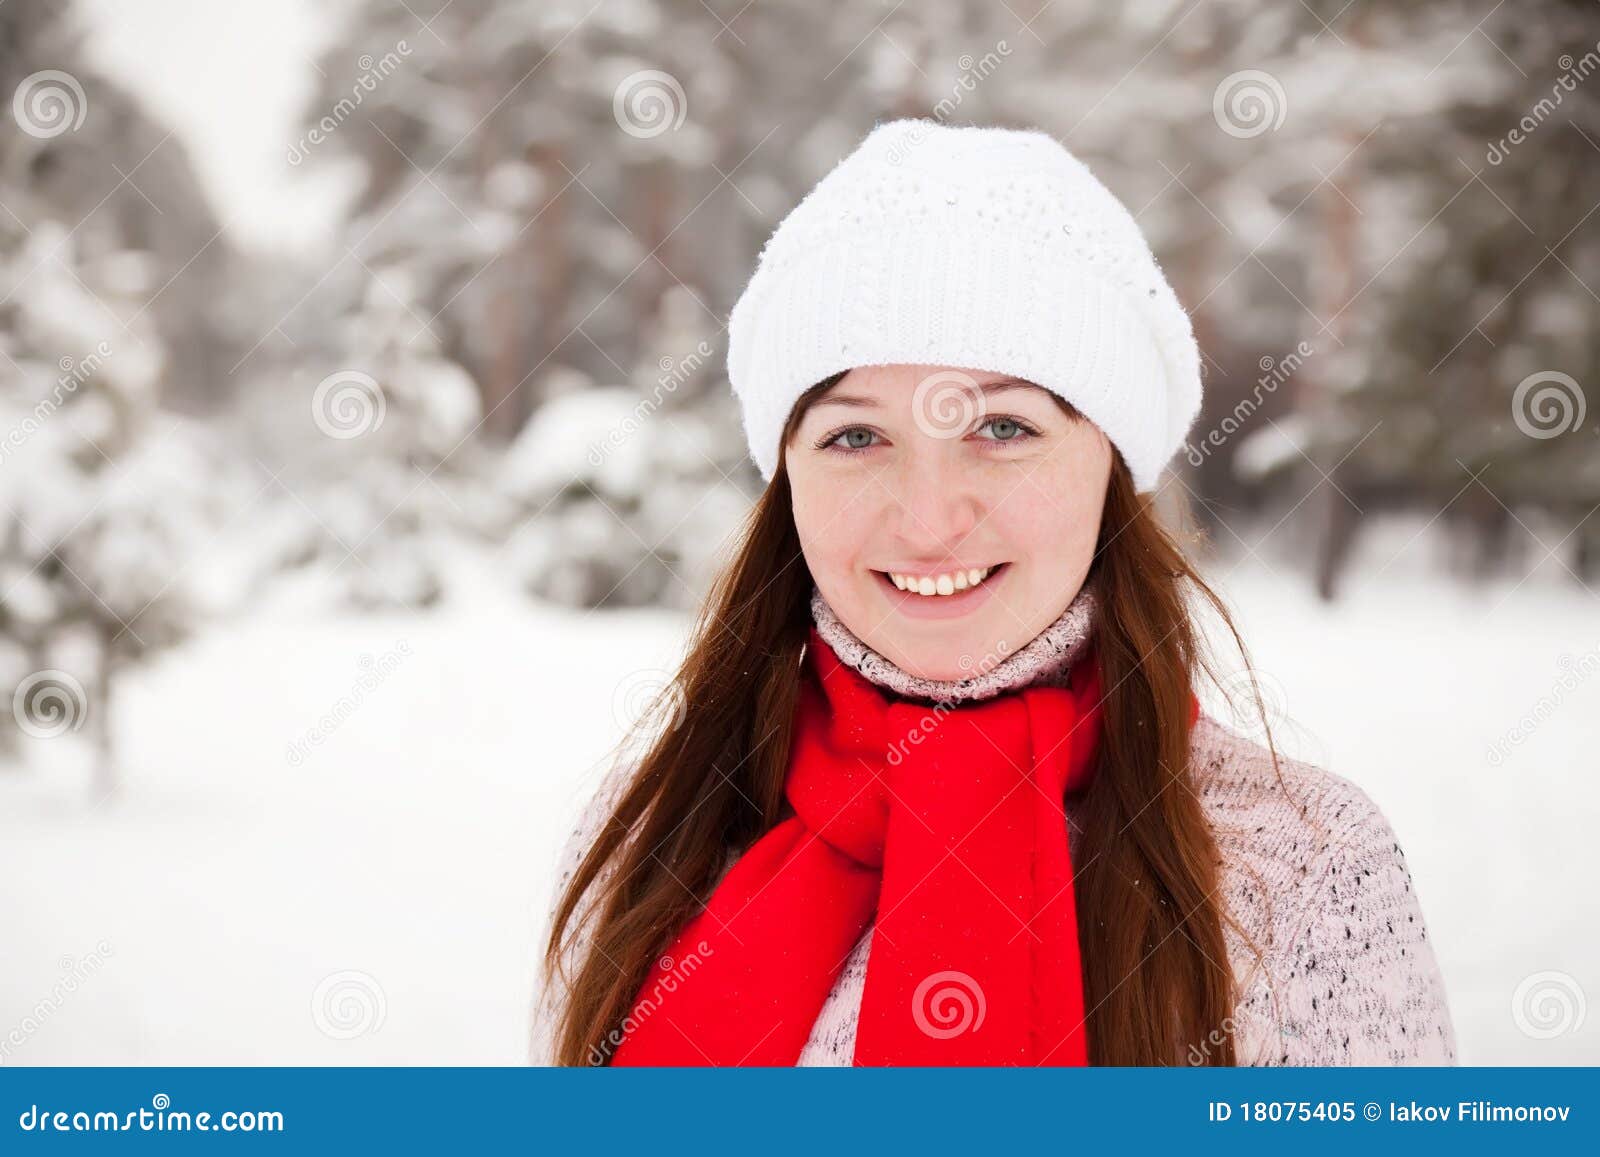 Porty girl at winter park stock image. Image of winter - 18075405